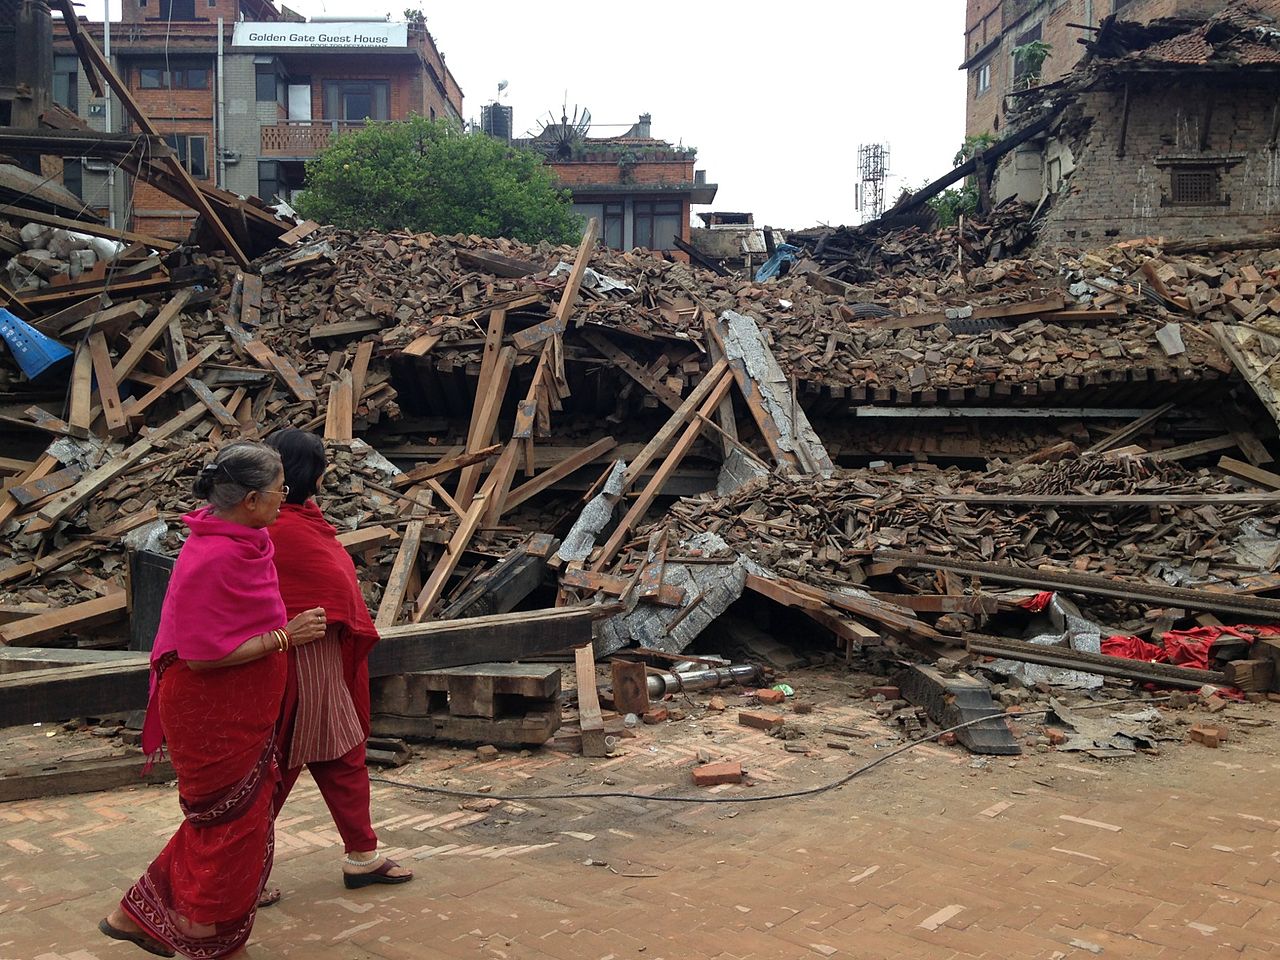 Women walk past buildings destroyed in Bhaktapuin by the April 2015 earthquake in Nepal